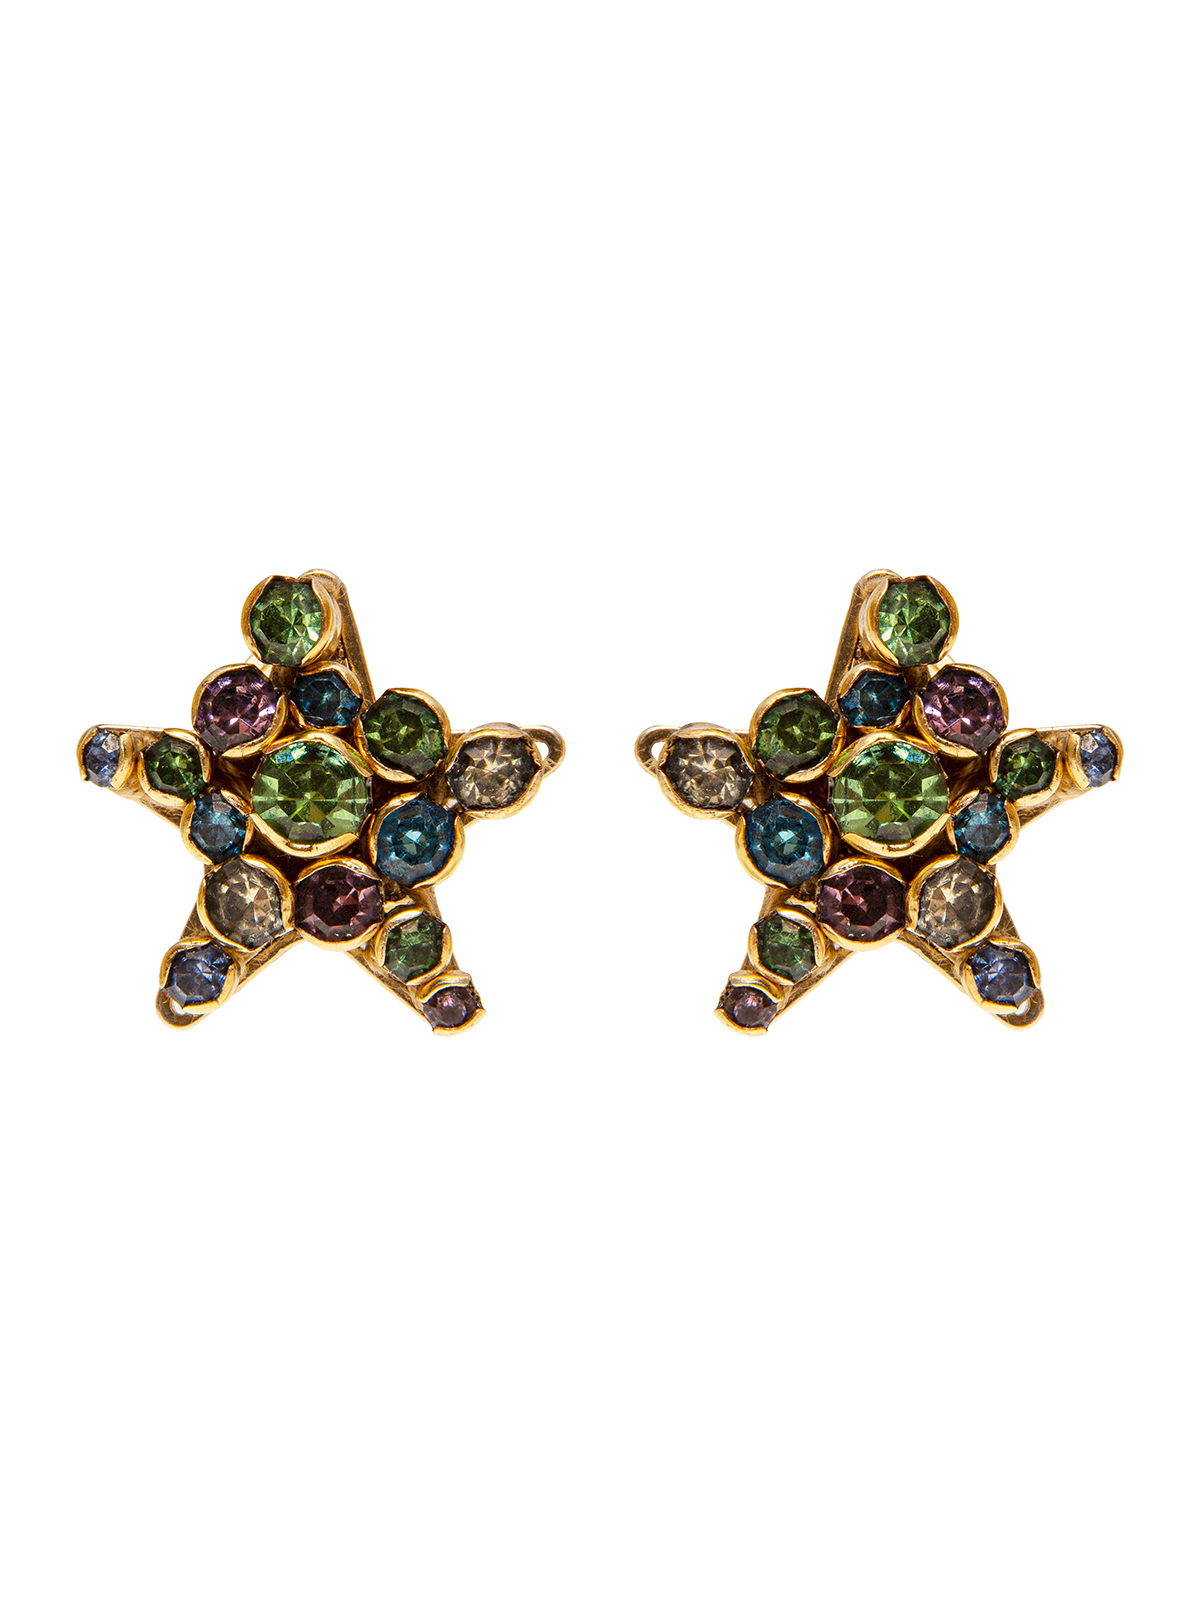 Star earrings embellished with multicolor stones